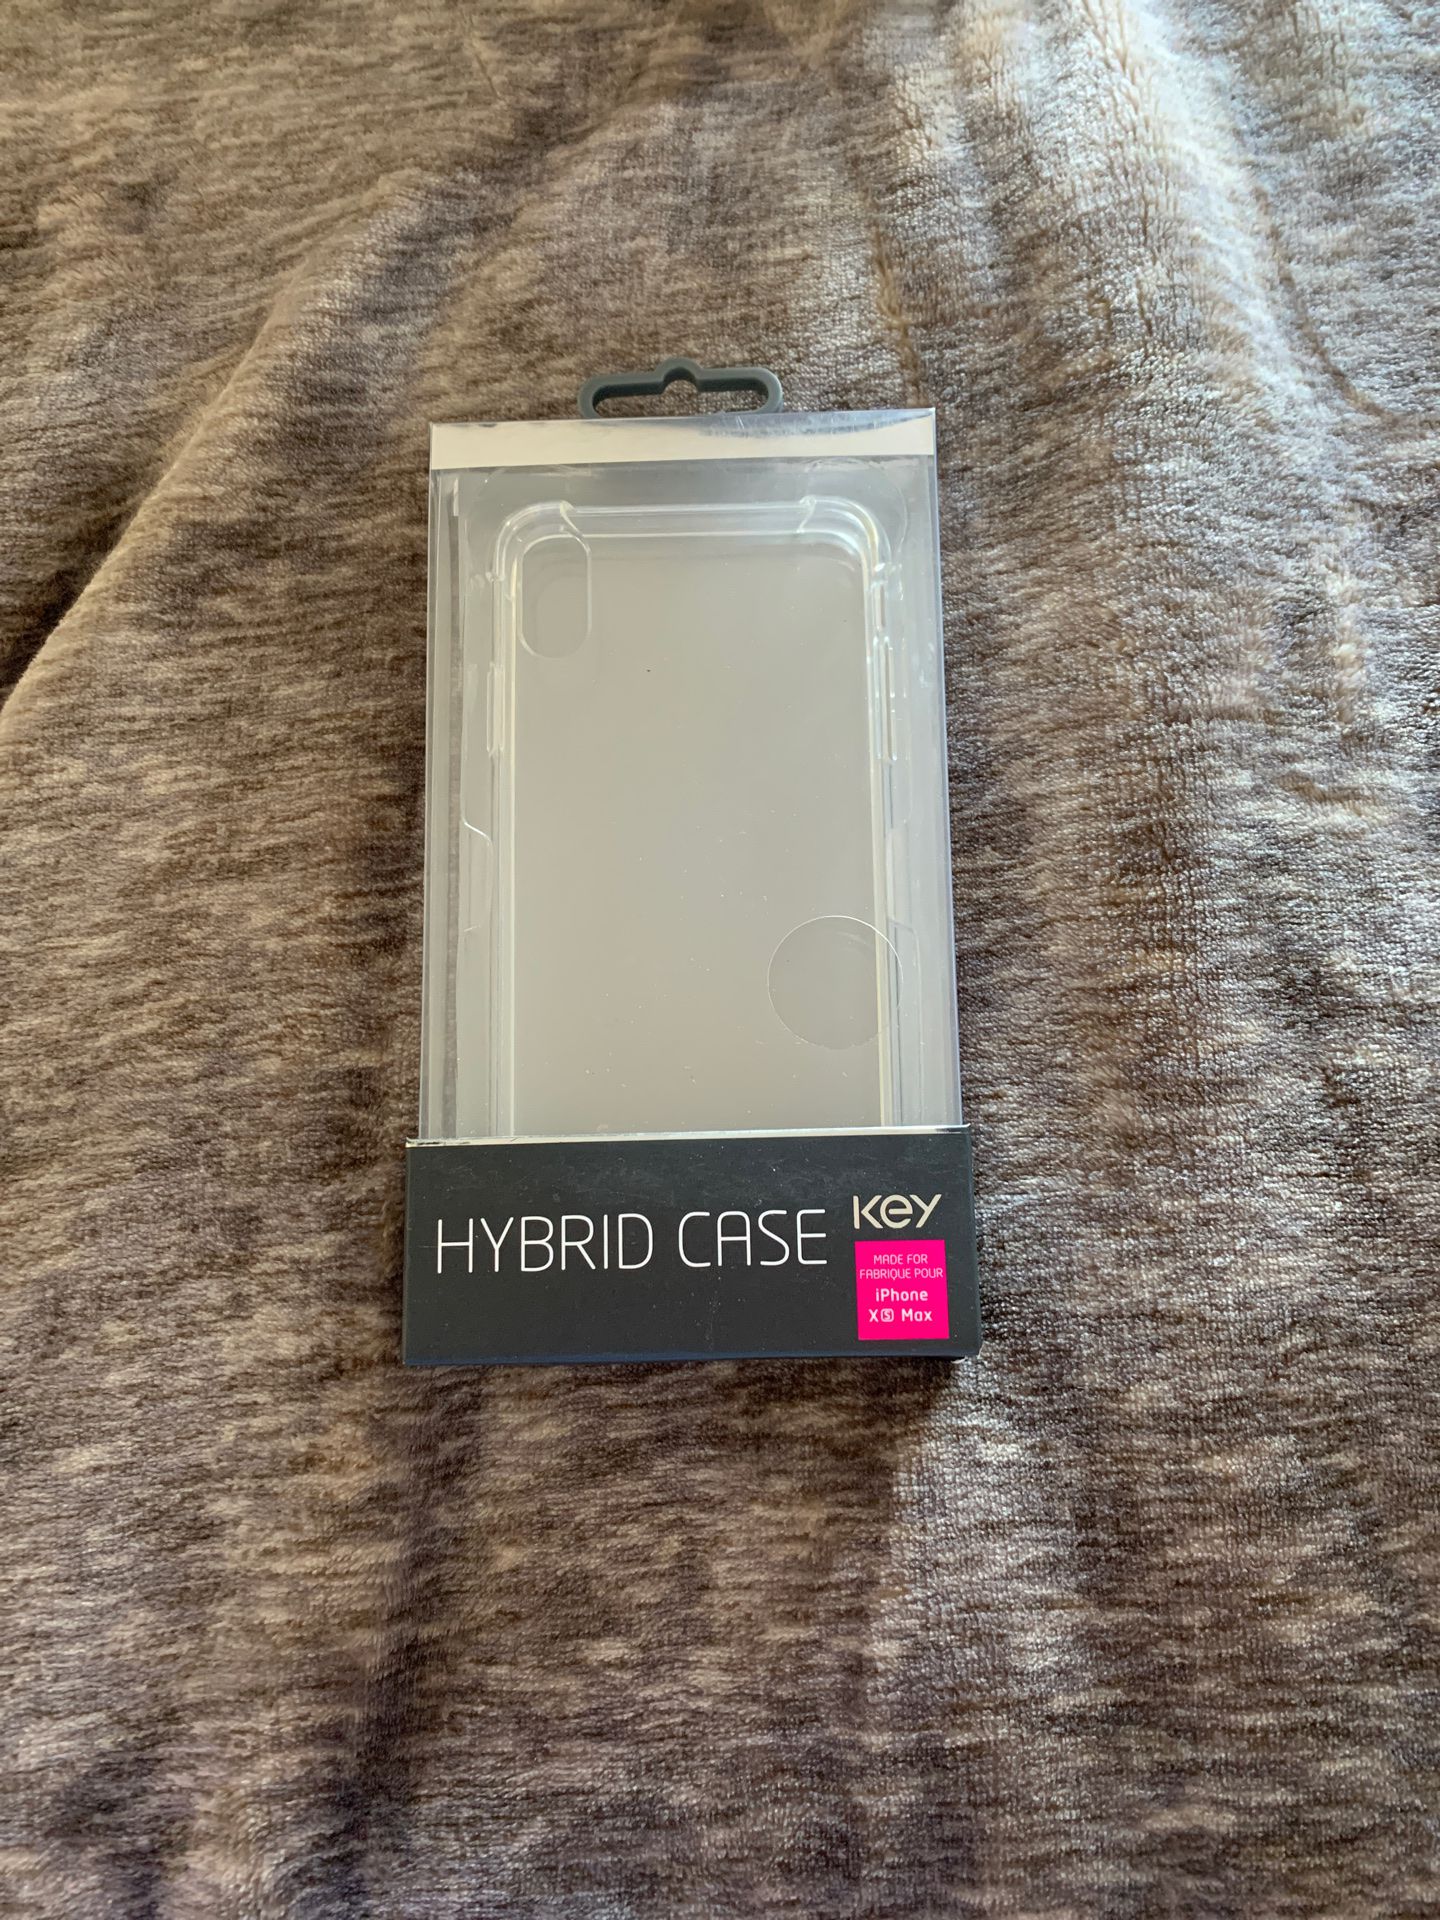 Hybrid case for iPhone XS Max